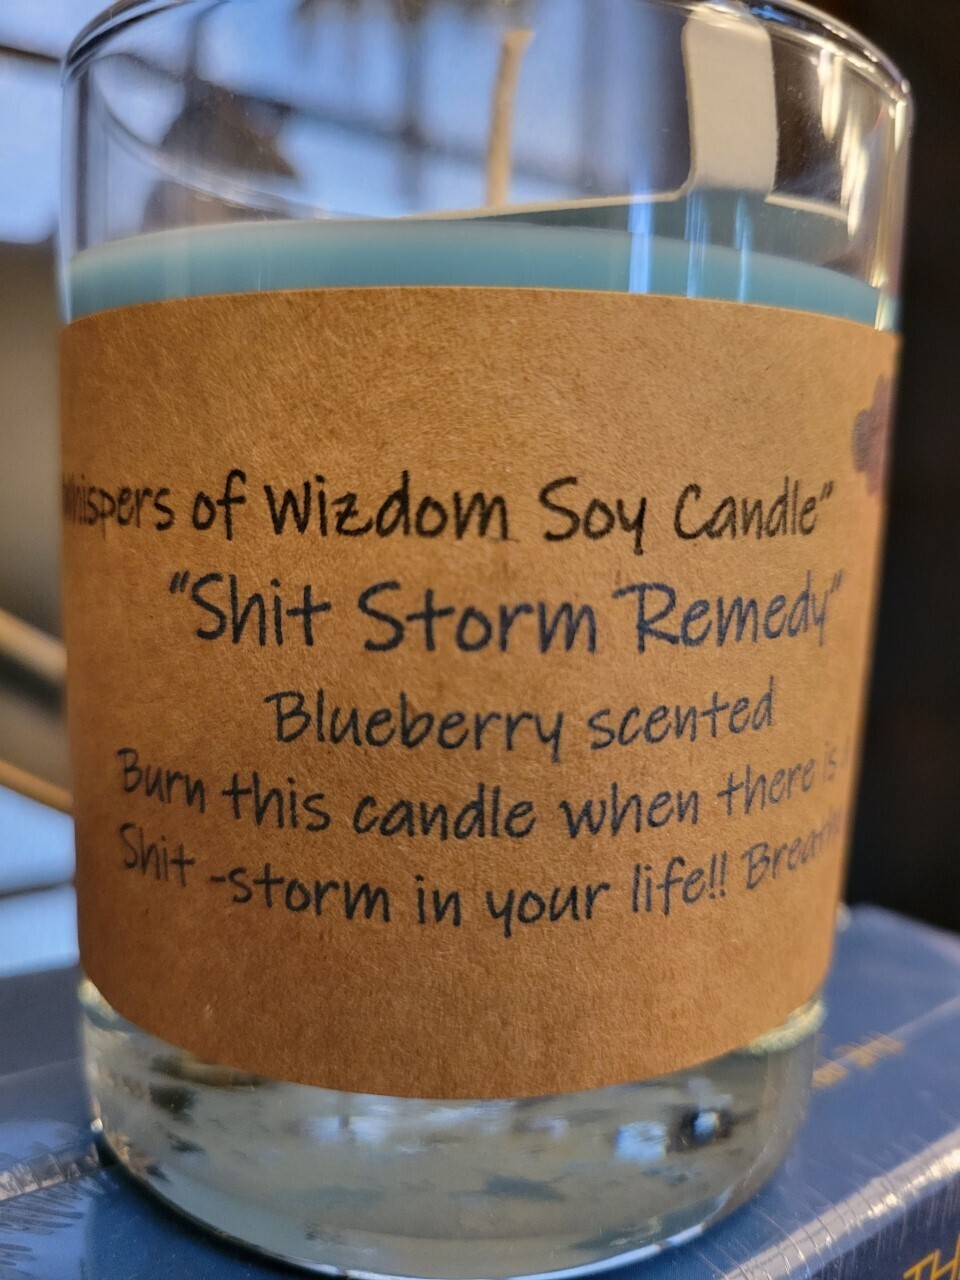 Judy's Soy Candle -"Shit Storm Remedy"